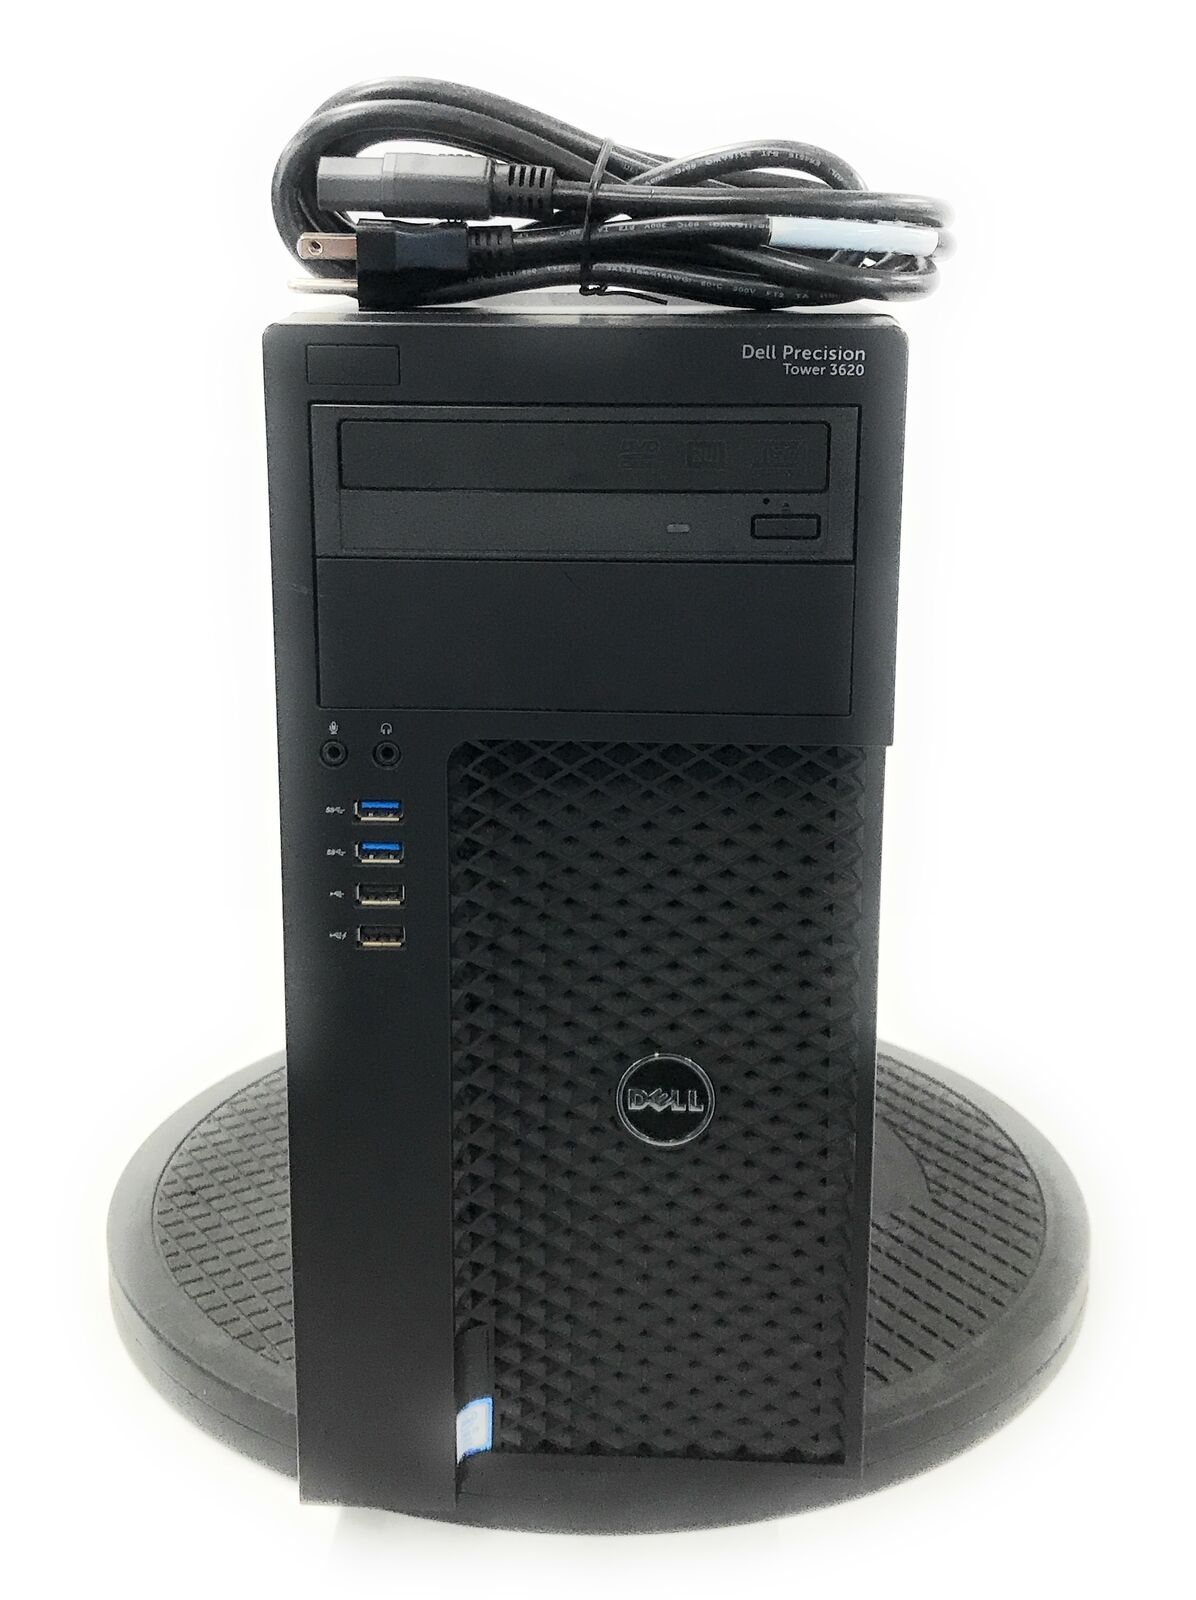 Dell Precision 3620 Tower PC Intel i7-6700 @ 3.40GHz 16GB DDR4 NO OS/HDD TESTED